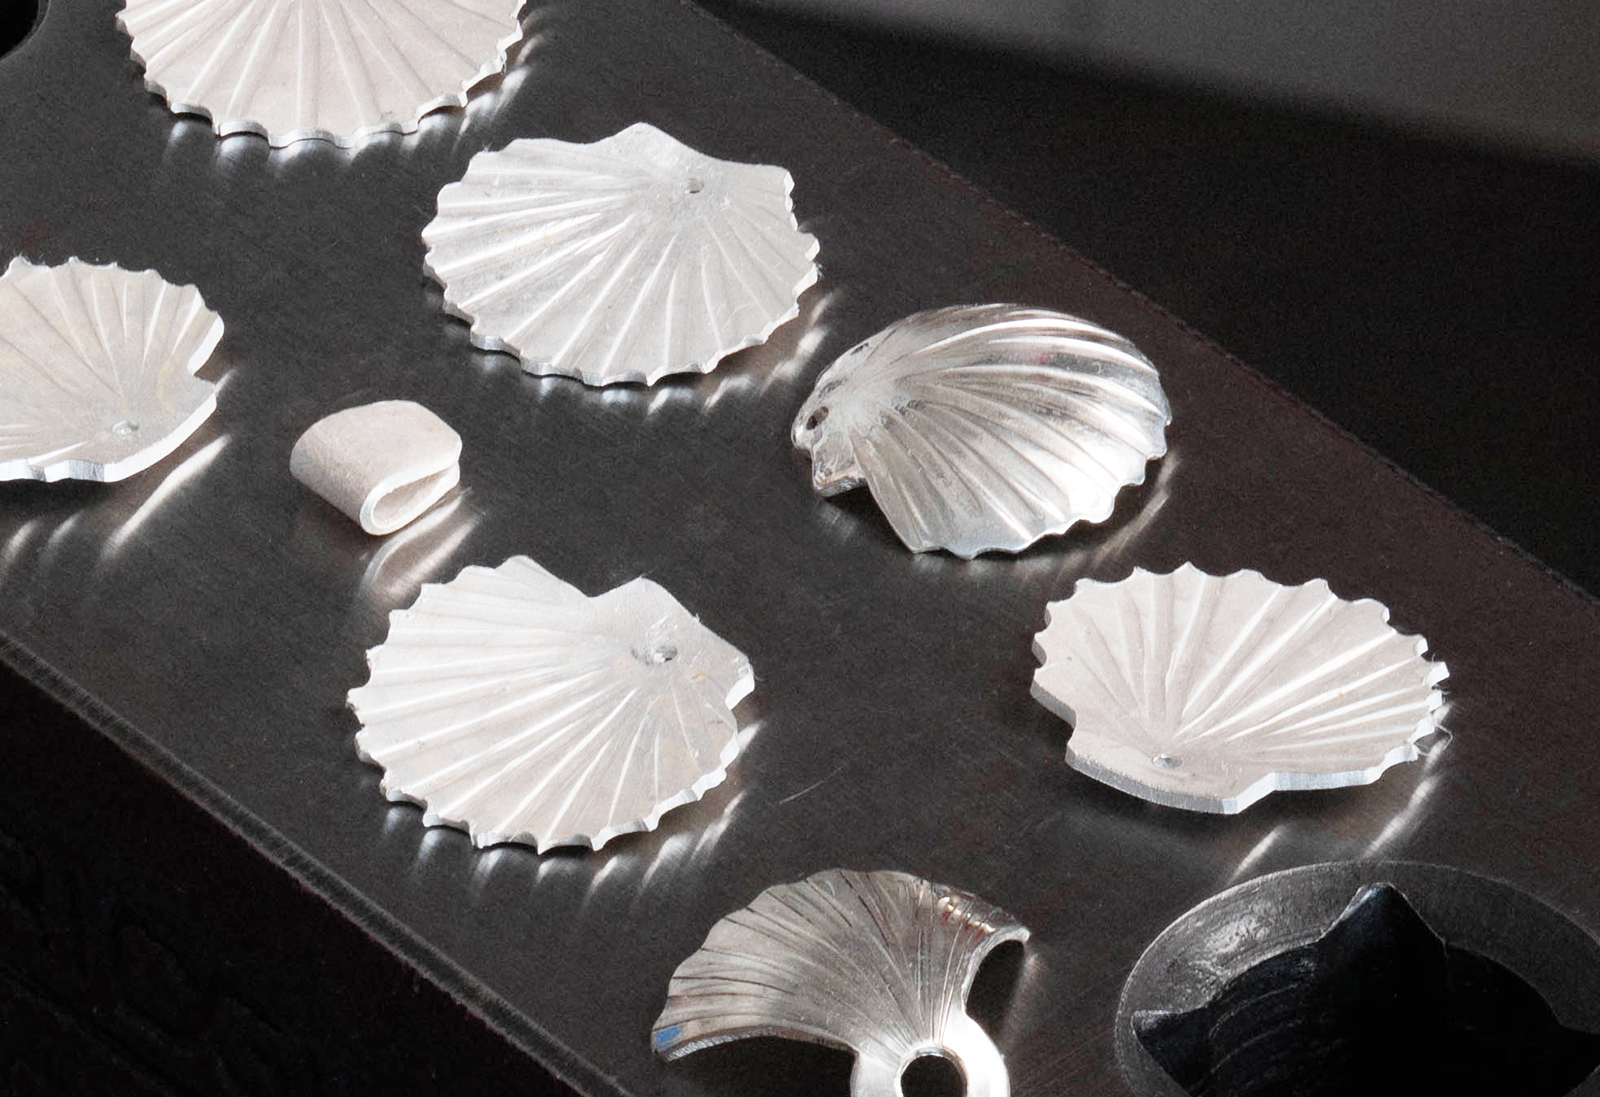 Shells from silver